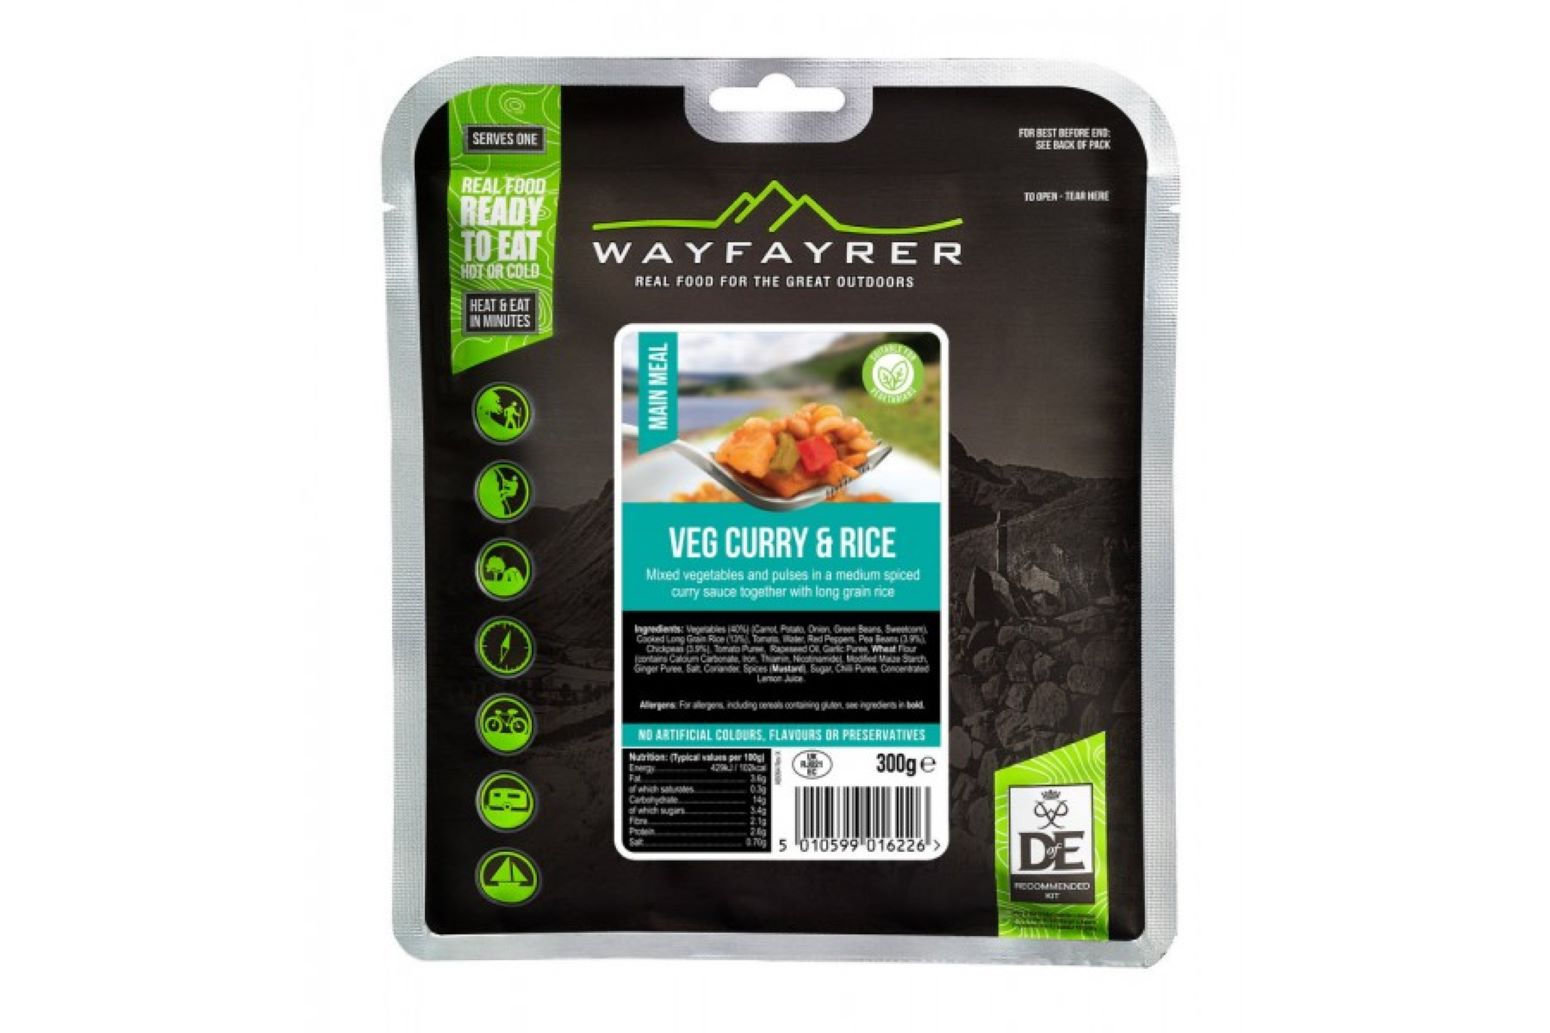 Wayfayrer Vegetable Curry &amp; Rice - Outdoor Camping Ready to Eat Meal Pouch